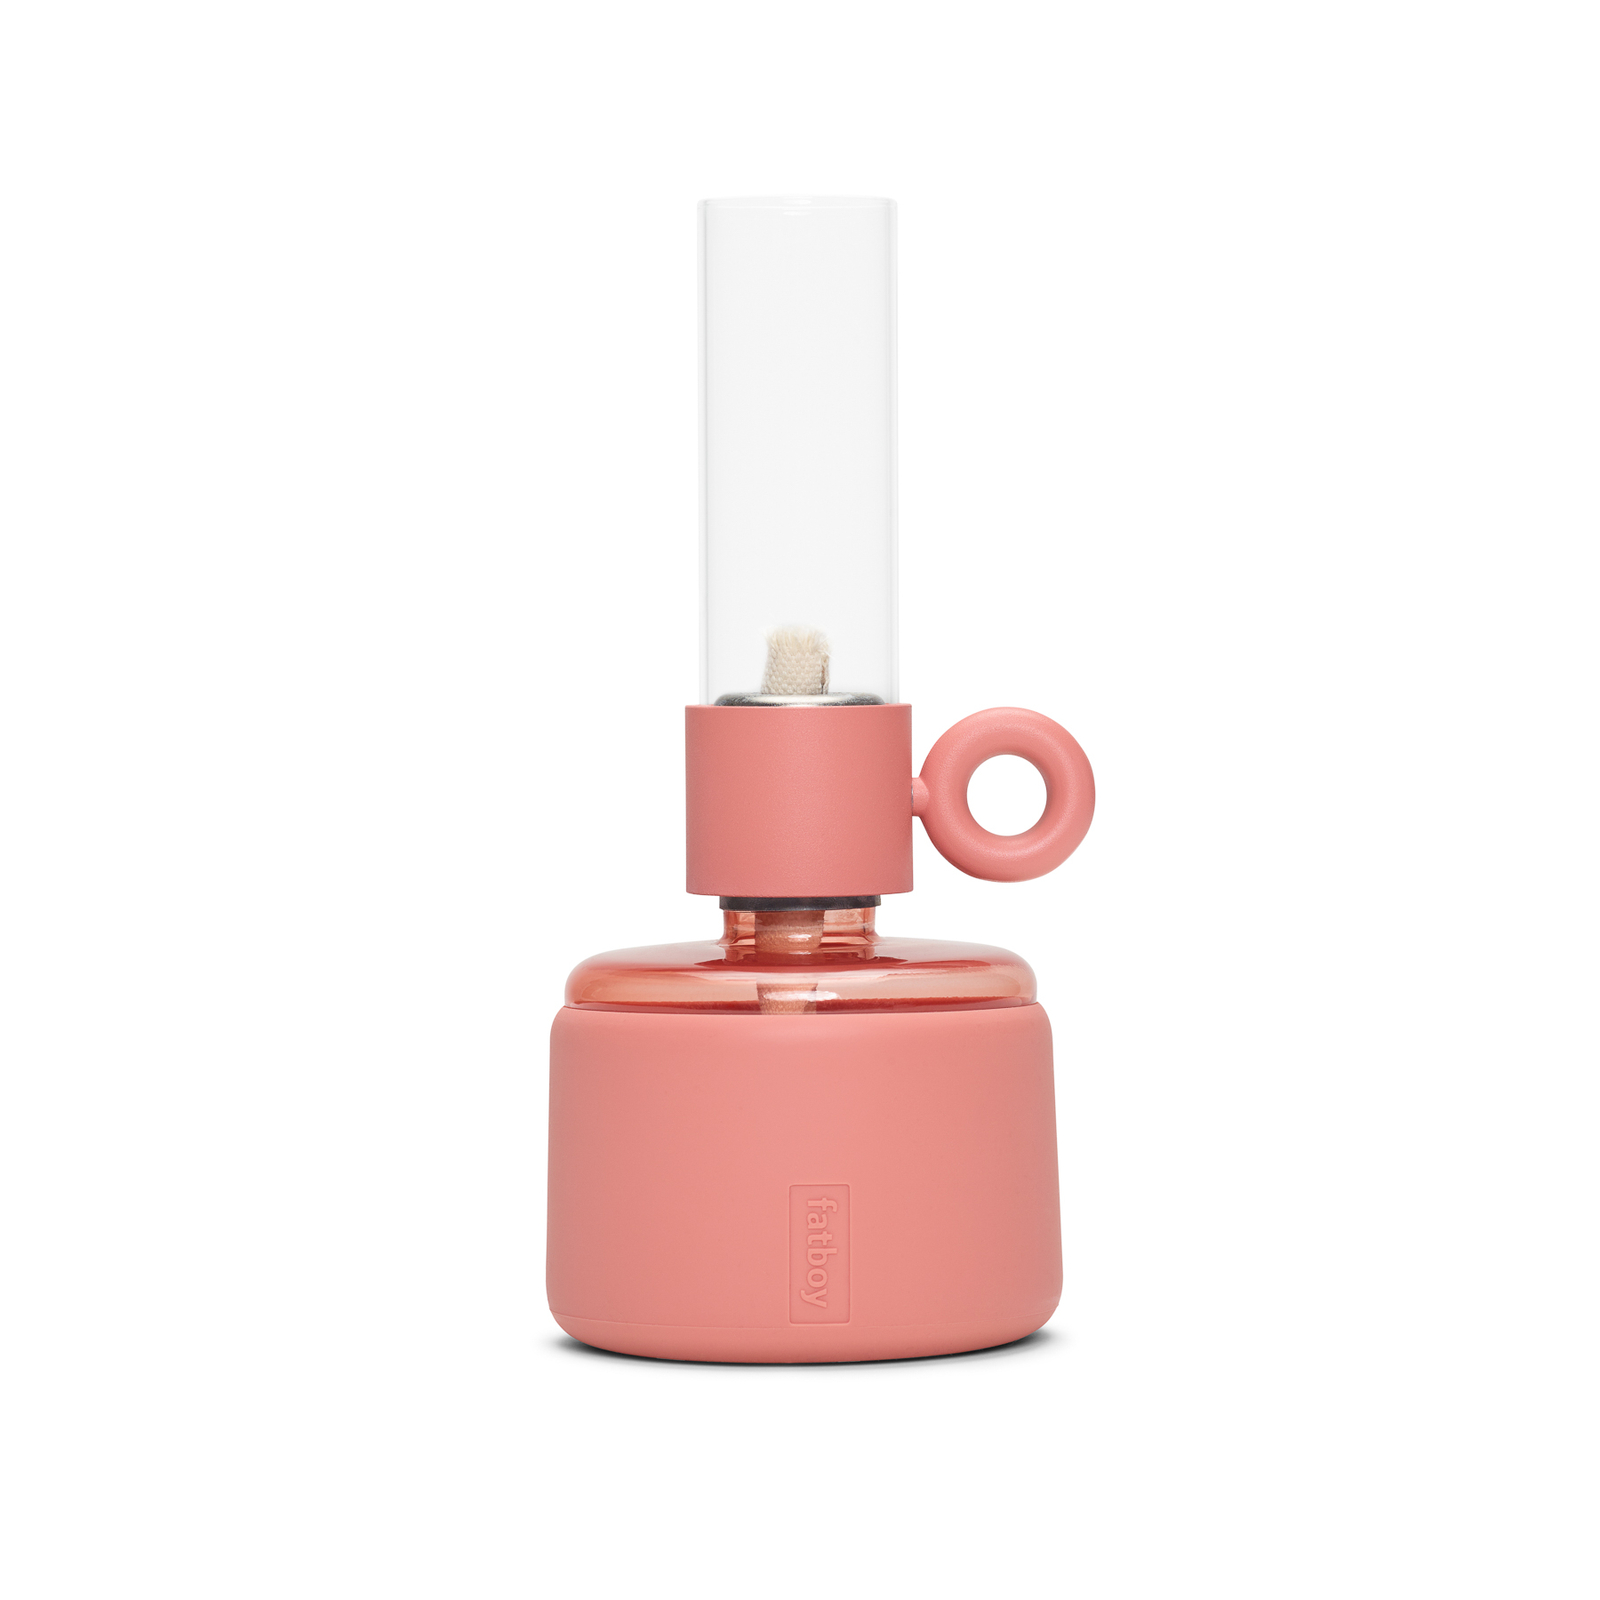 Fatboy Flamtastique XS oil lamp, cheeky pink